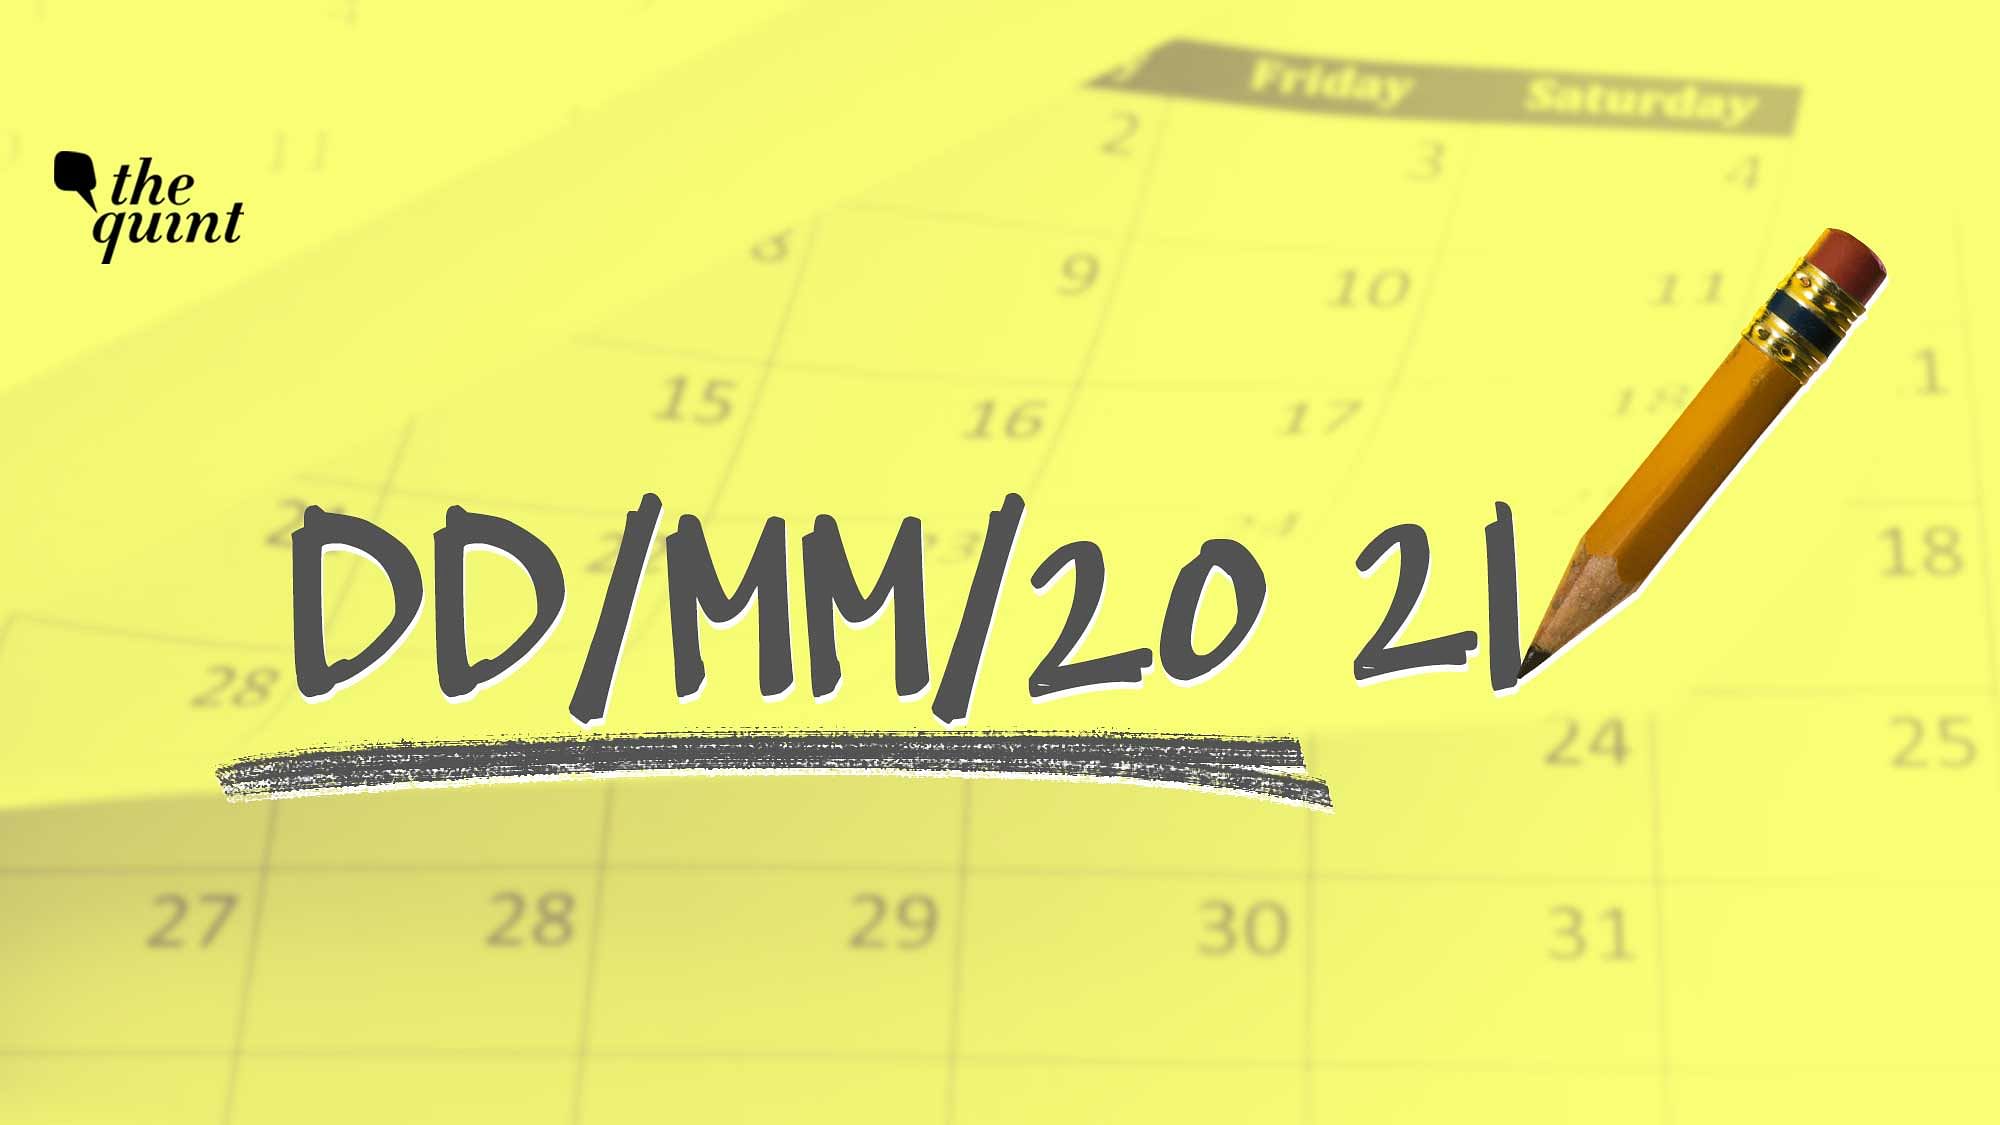 If you’re not writing your dates in the full dd/mm/yyyy format this year, something can go horribly wrong!